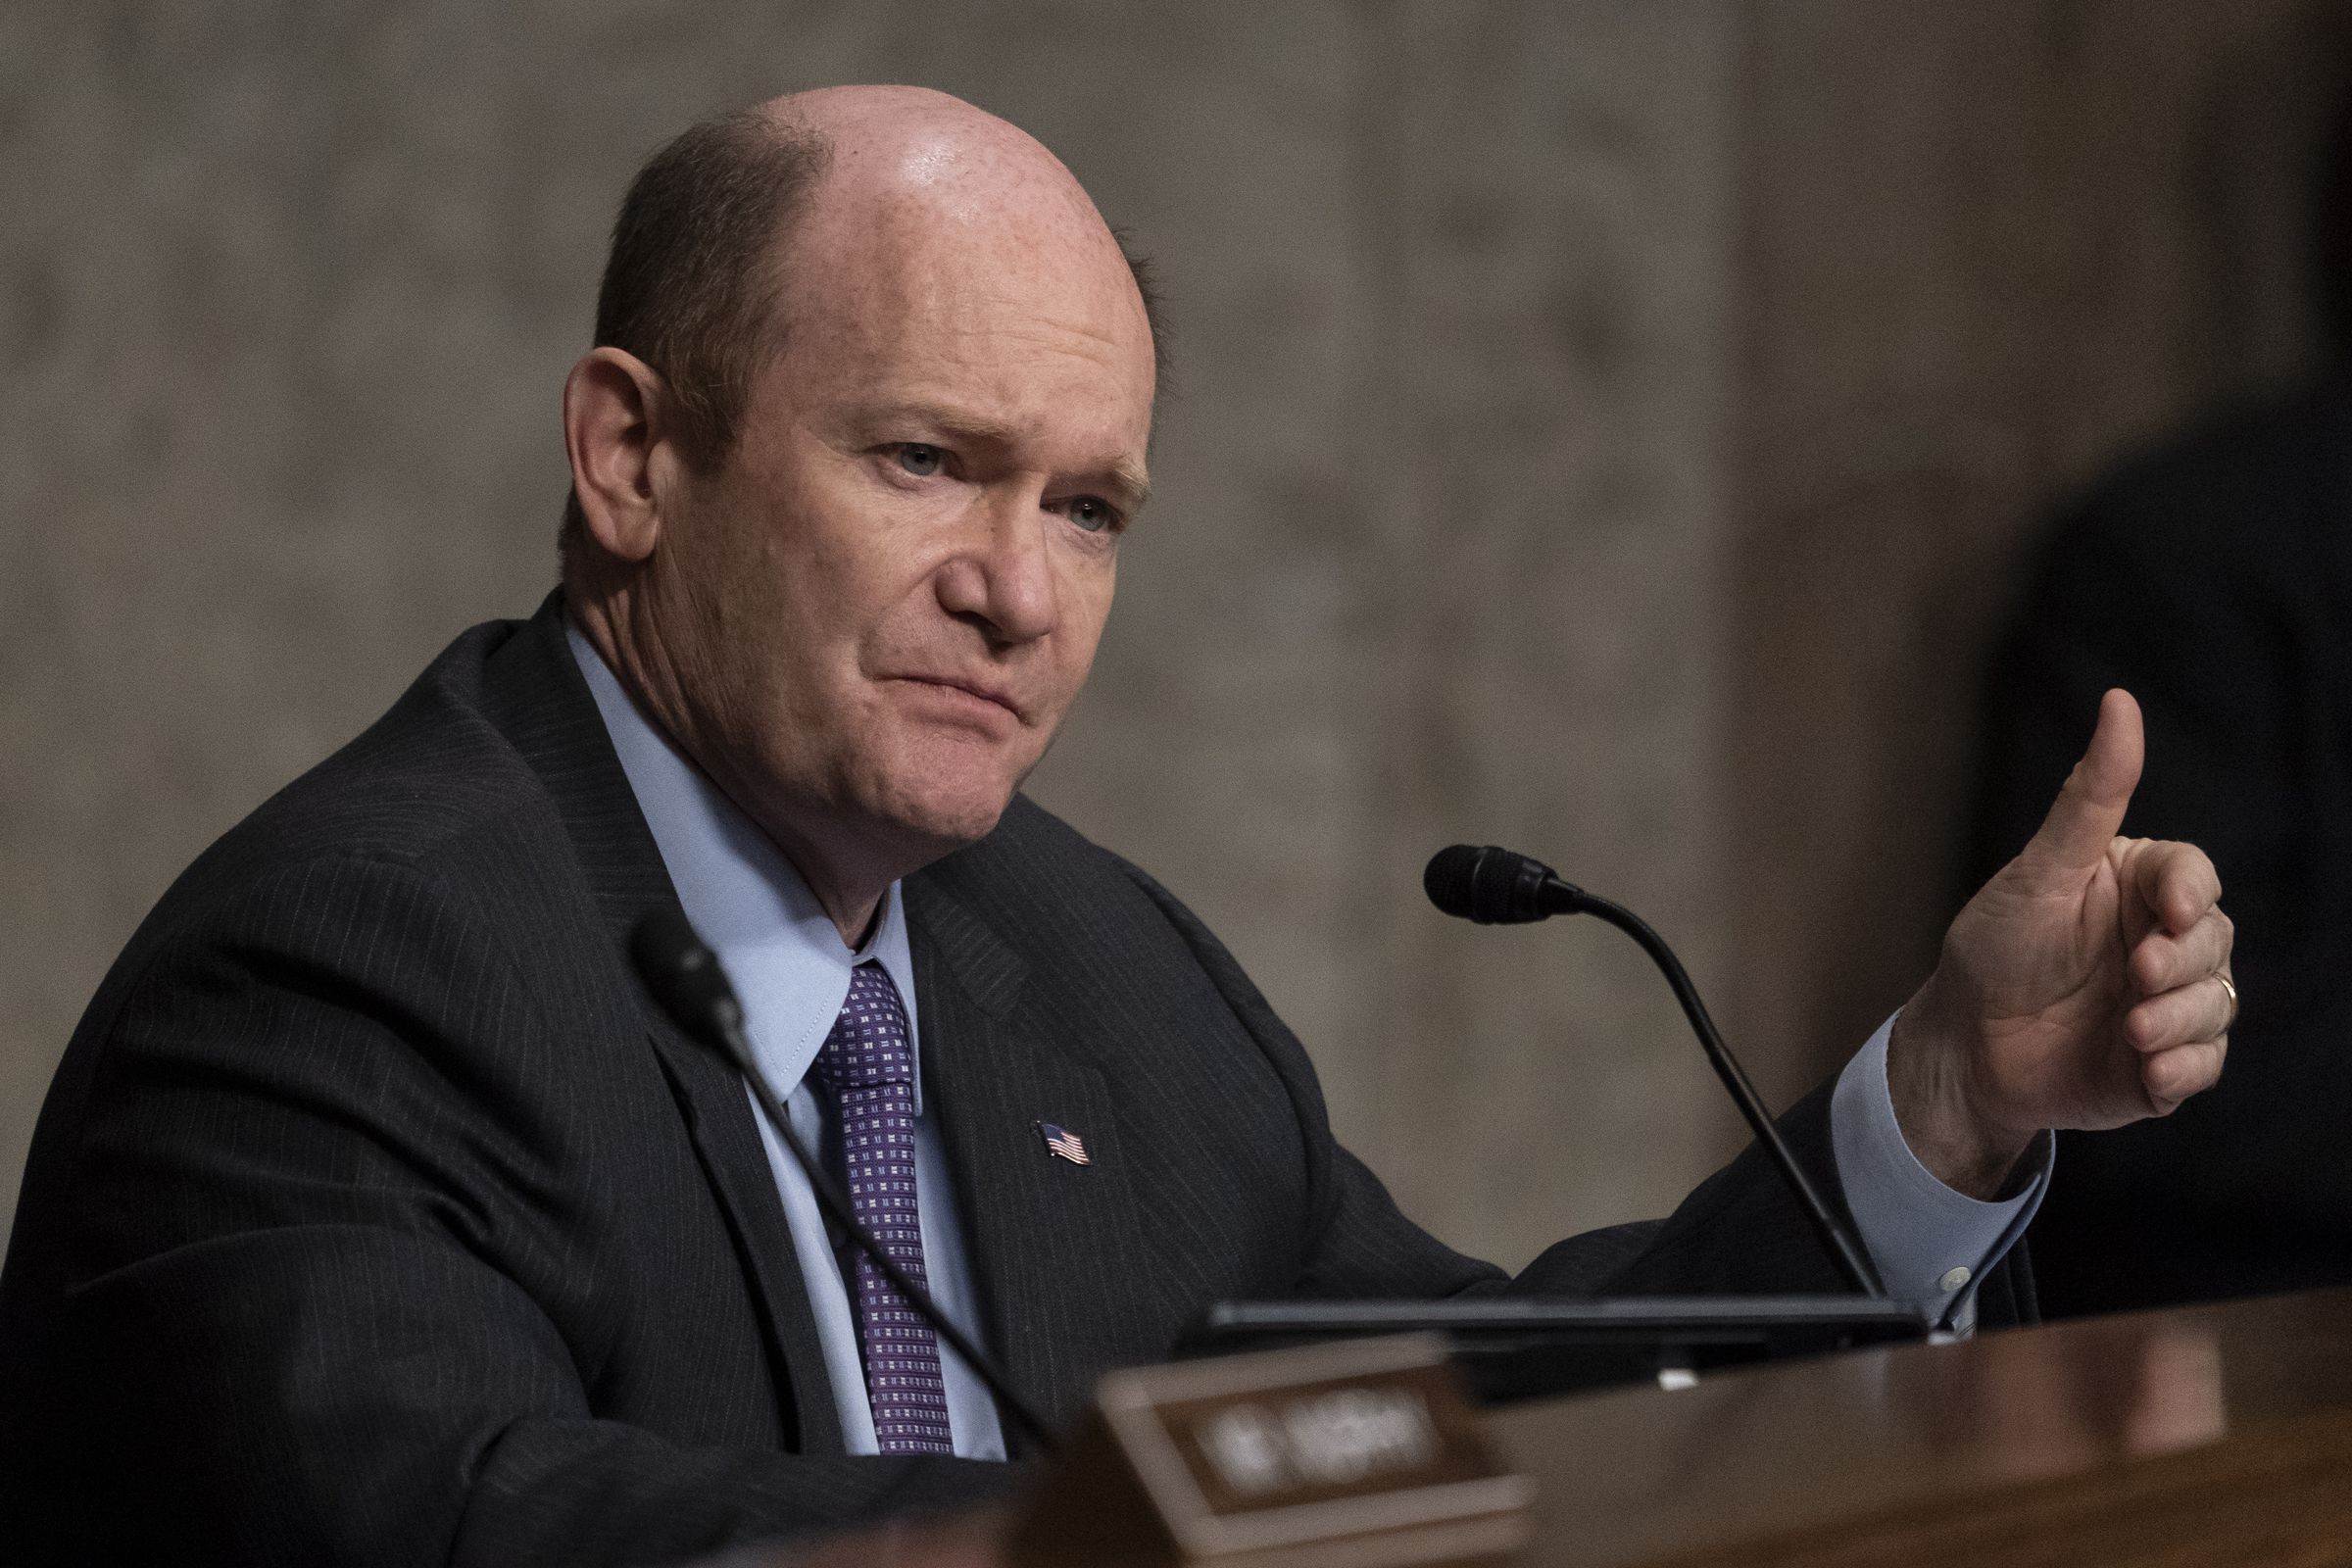 Sen. Chris Coons (D-DE) speaks during a Senate Foreign Relations Committee hearing